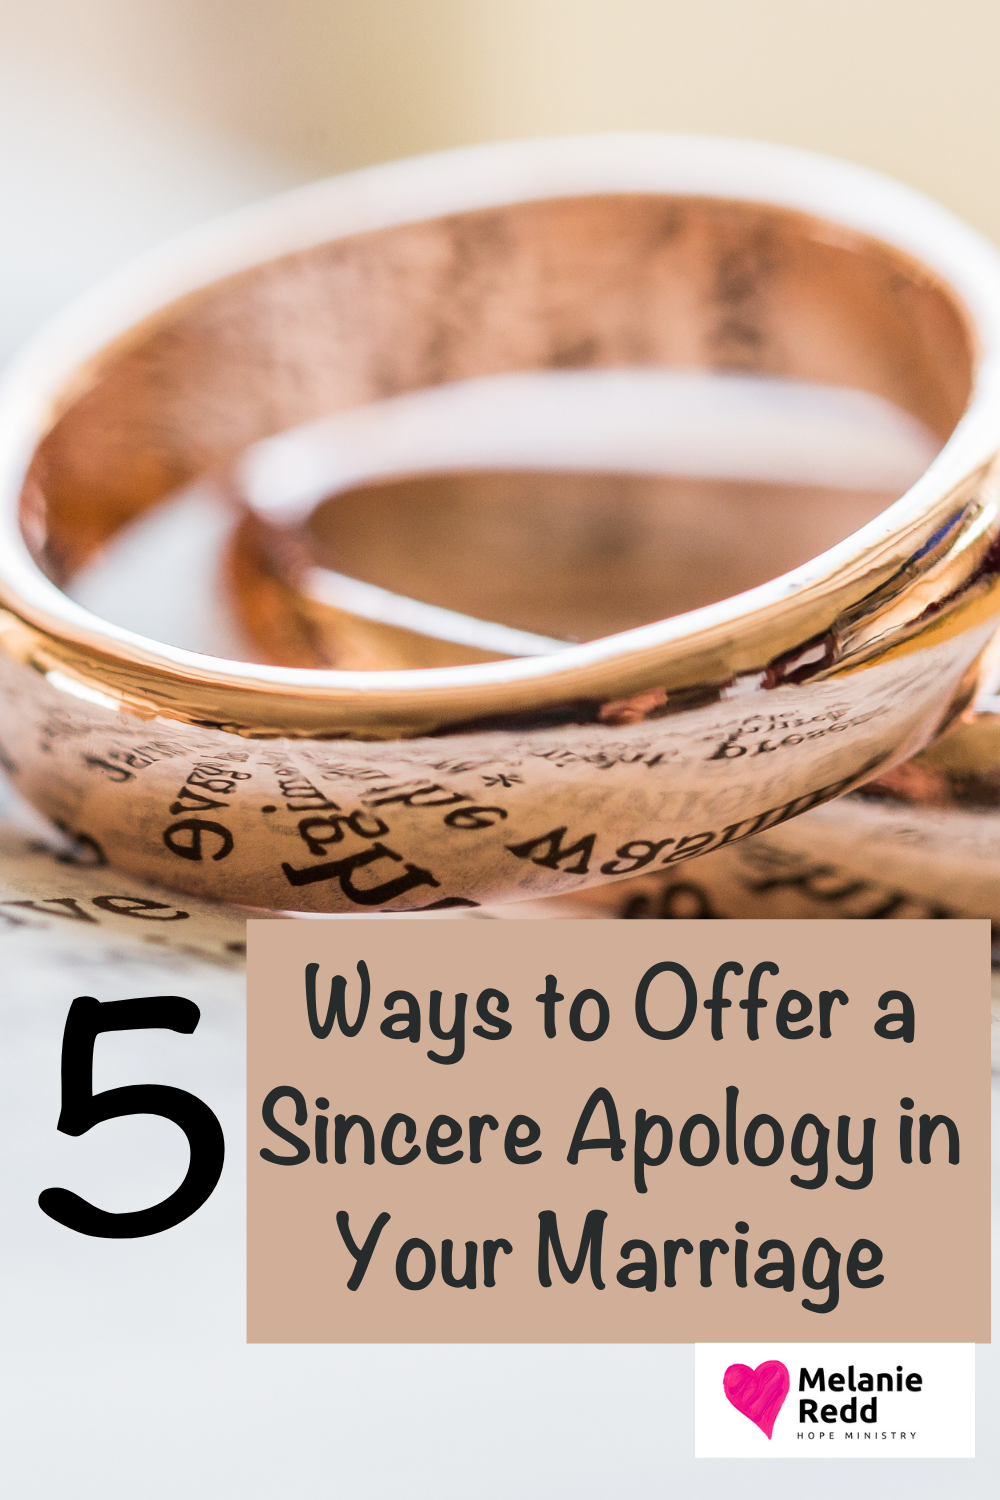 We all blow it at times in our marriages and need to make things right. Here are 5 ways to offer a sincere apology in your marriage.